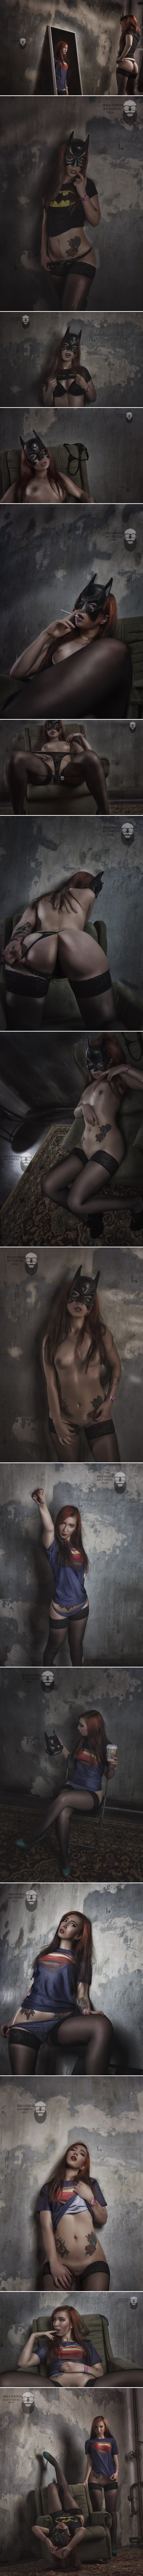 My first work in the studio and the nude genre. Batman v Superman - NSFW, My, Superman, Batman, Batman v superman, Superheroes, Erotic, Strawberry, The photo, Longpost